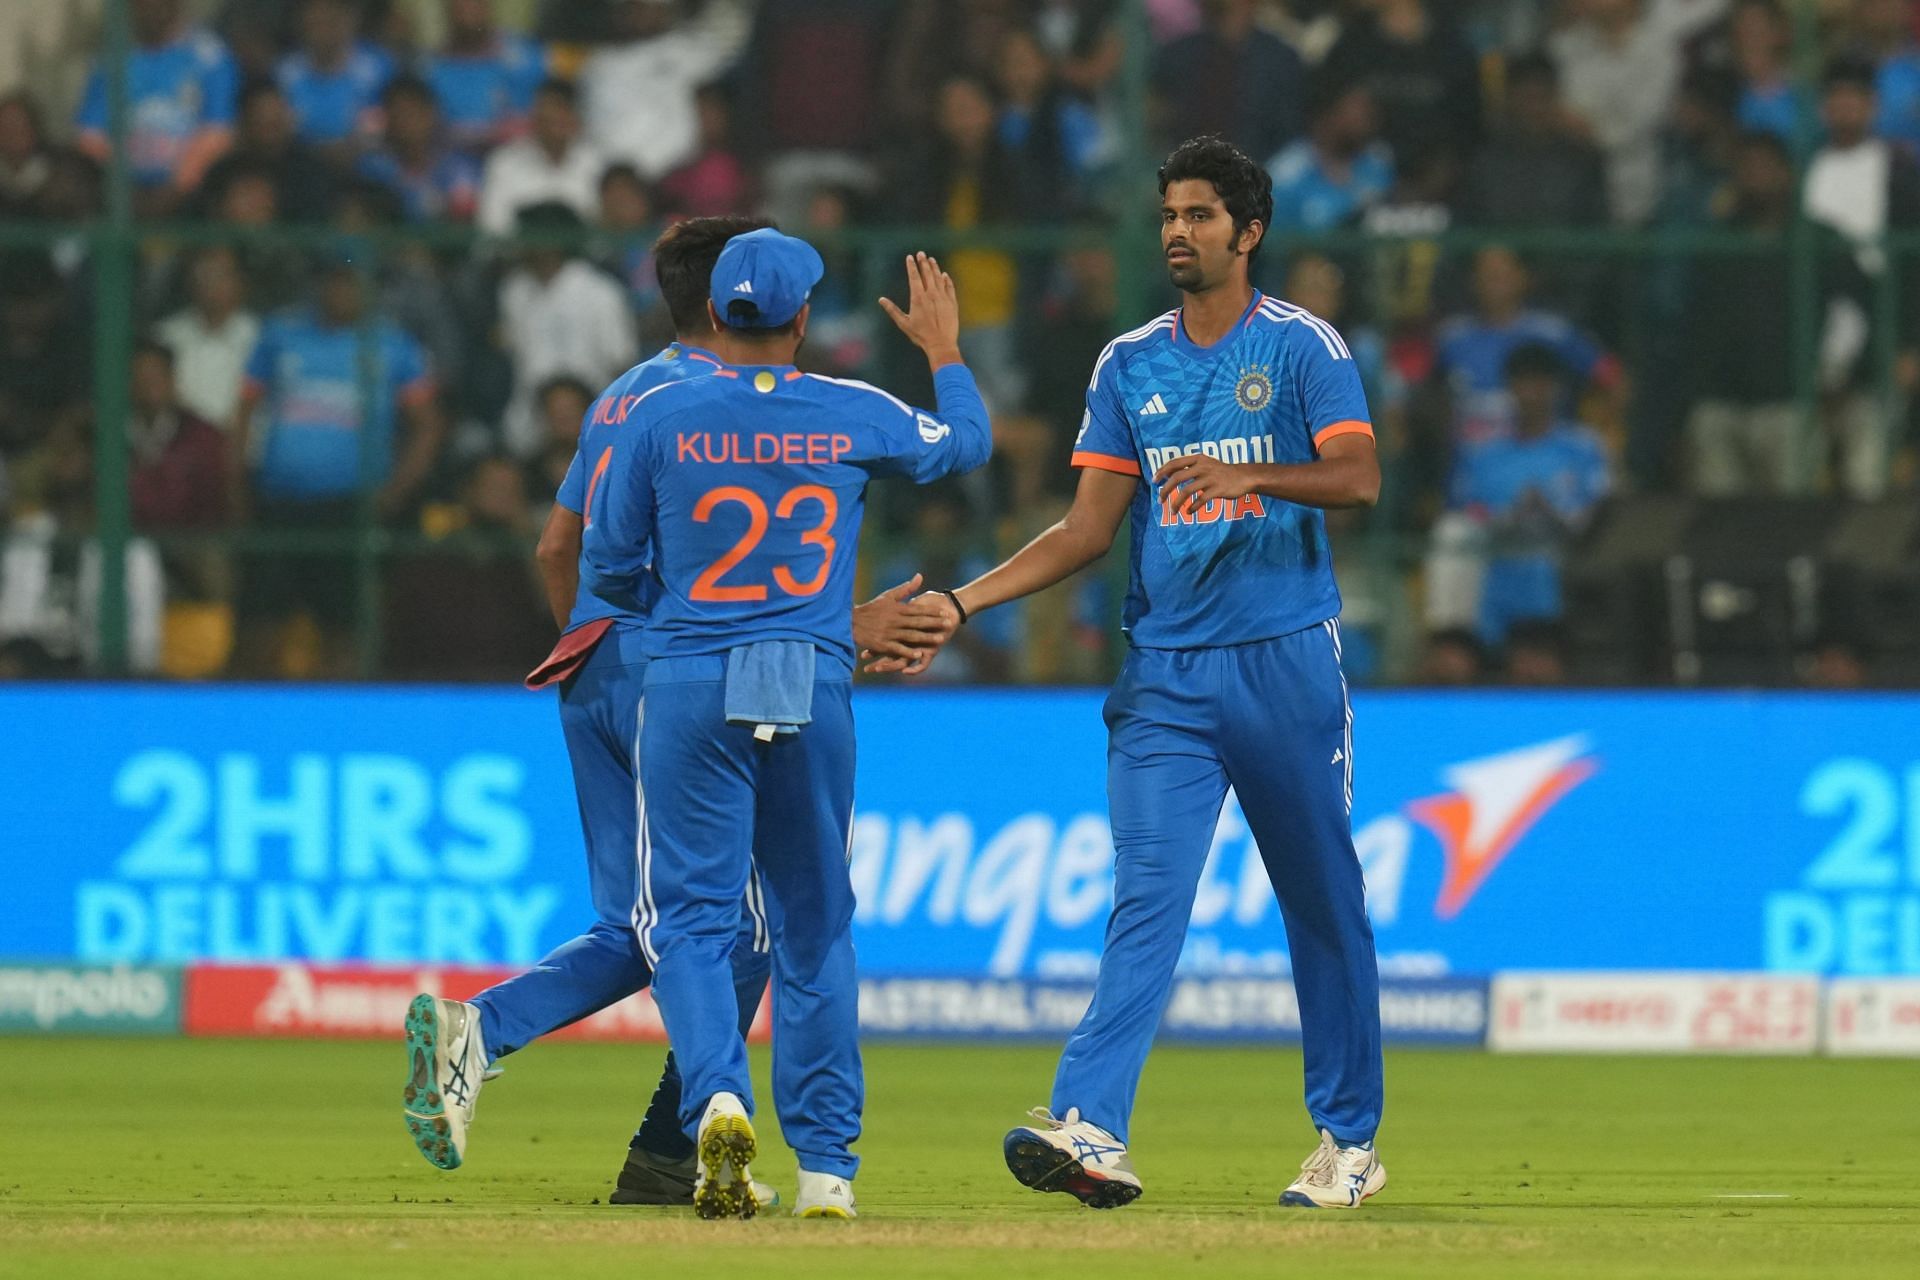 Washington Sundar was the pick of the Indian bowlers